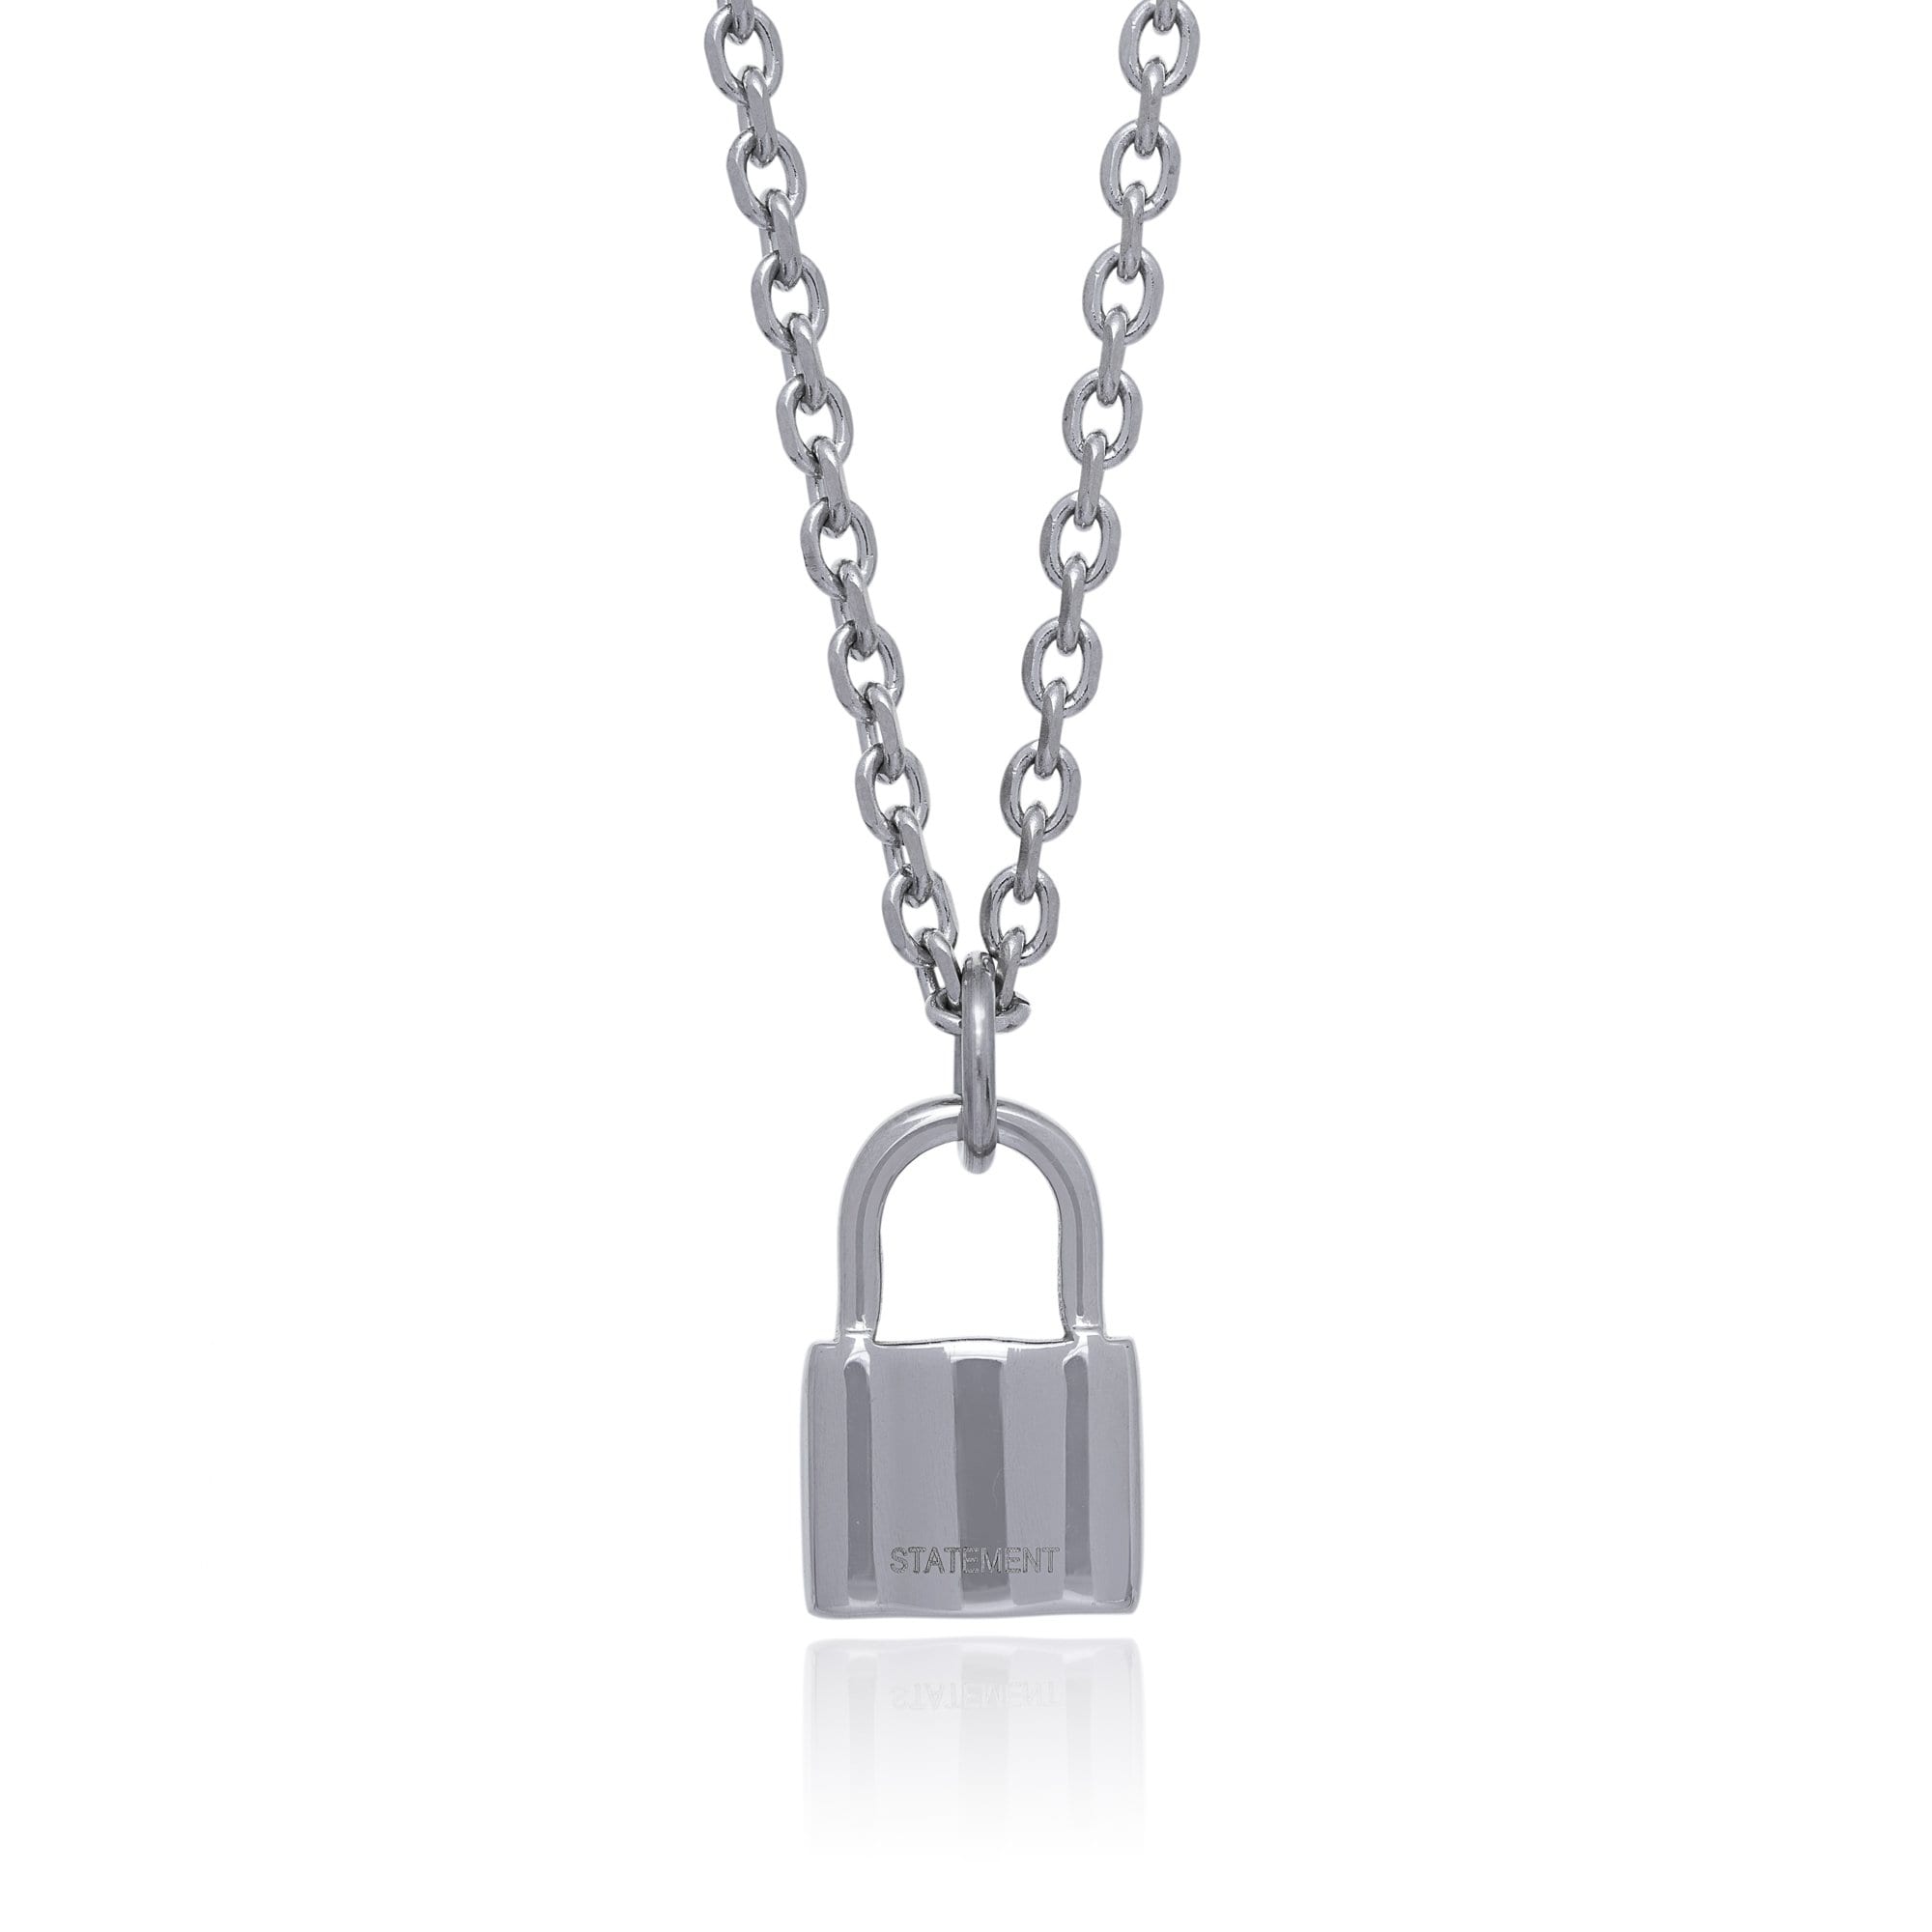 Mini Padlock Necklace Pendant by Statement Collective_02